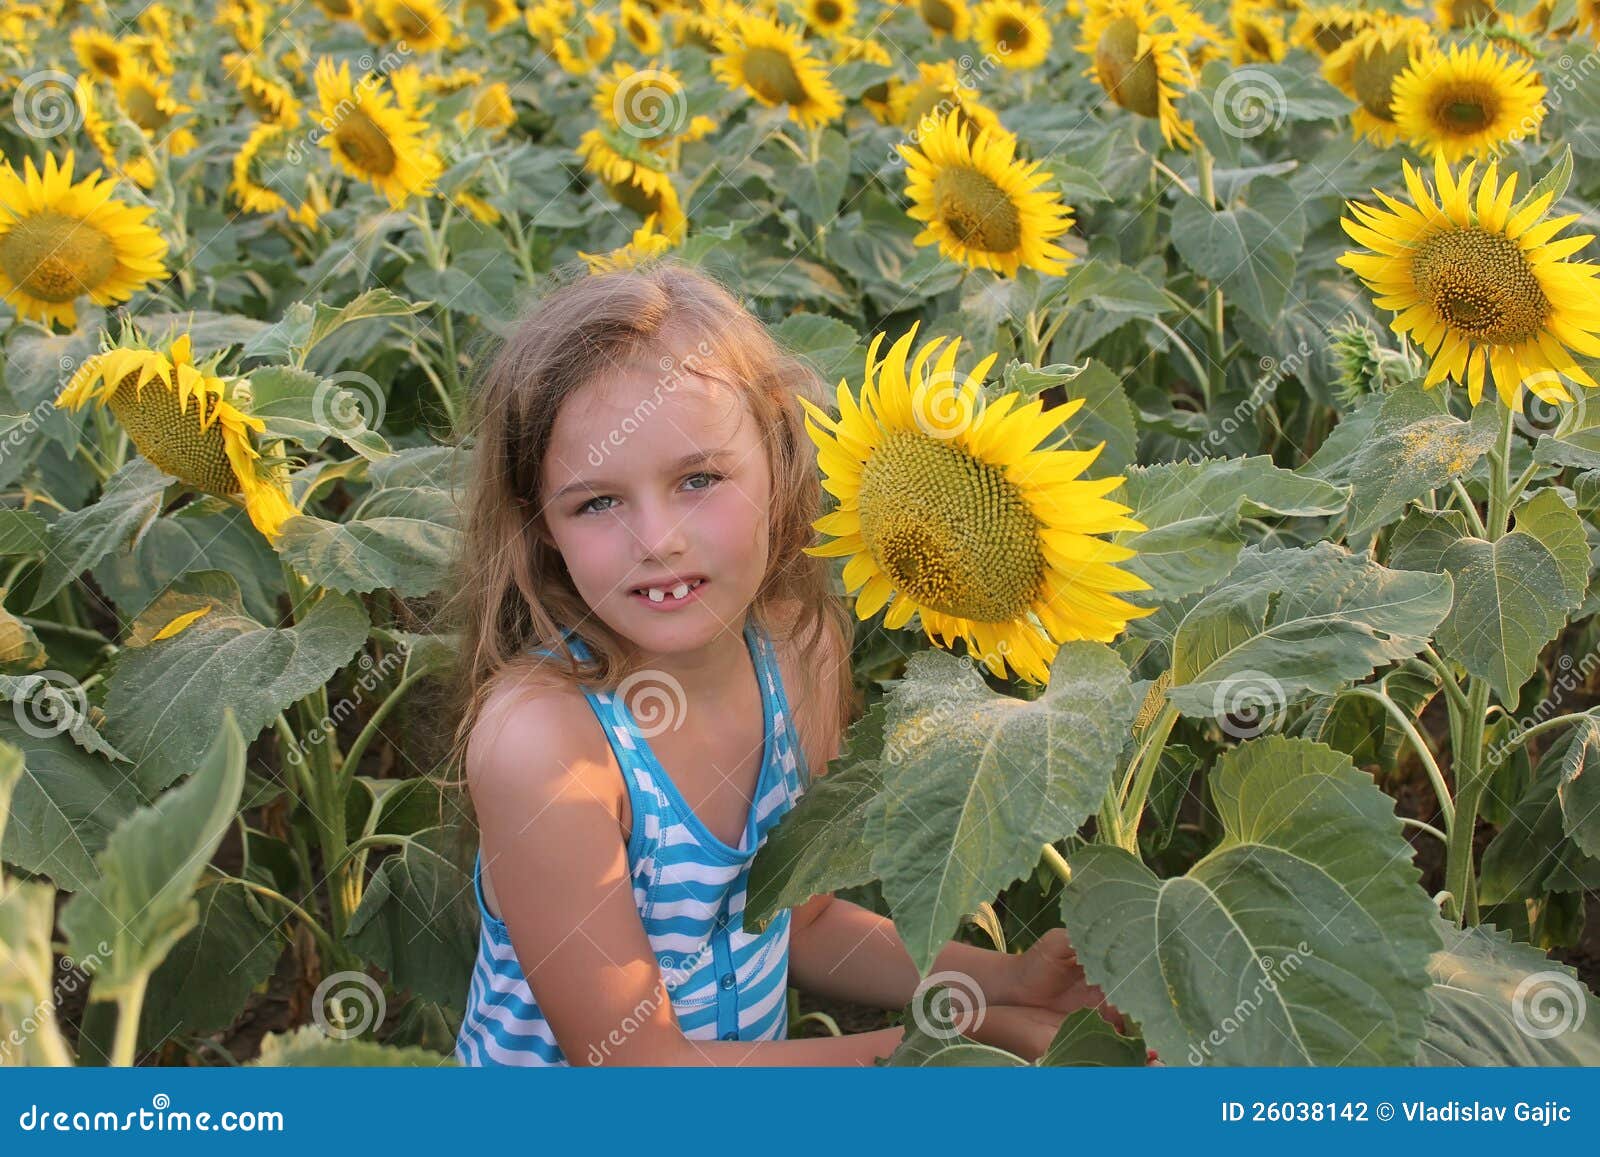 A Girl In The Sunflowers [1984 TV Movie]